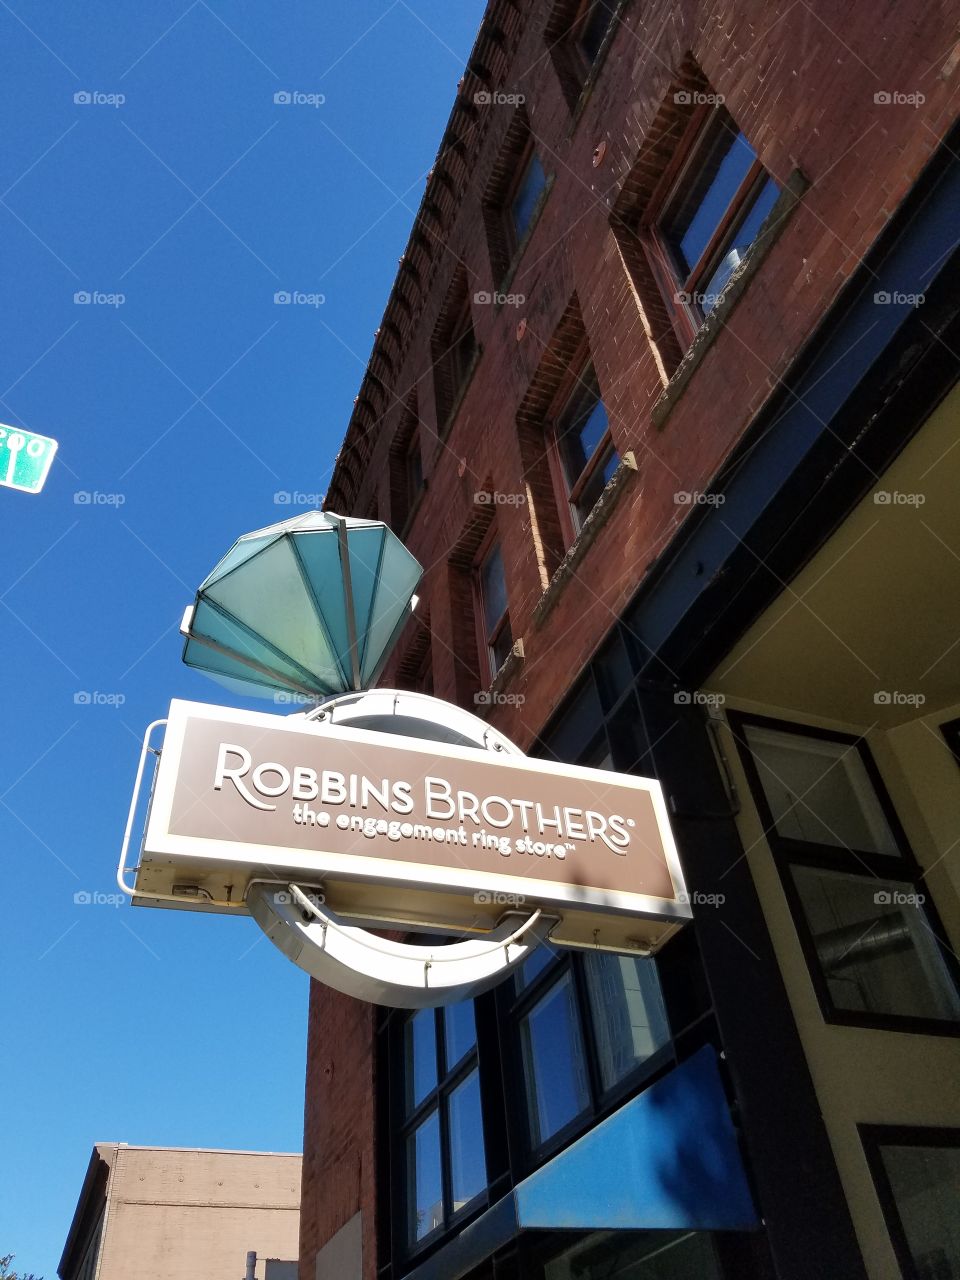 Robins Brothers Store Belltown